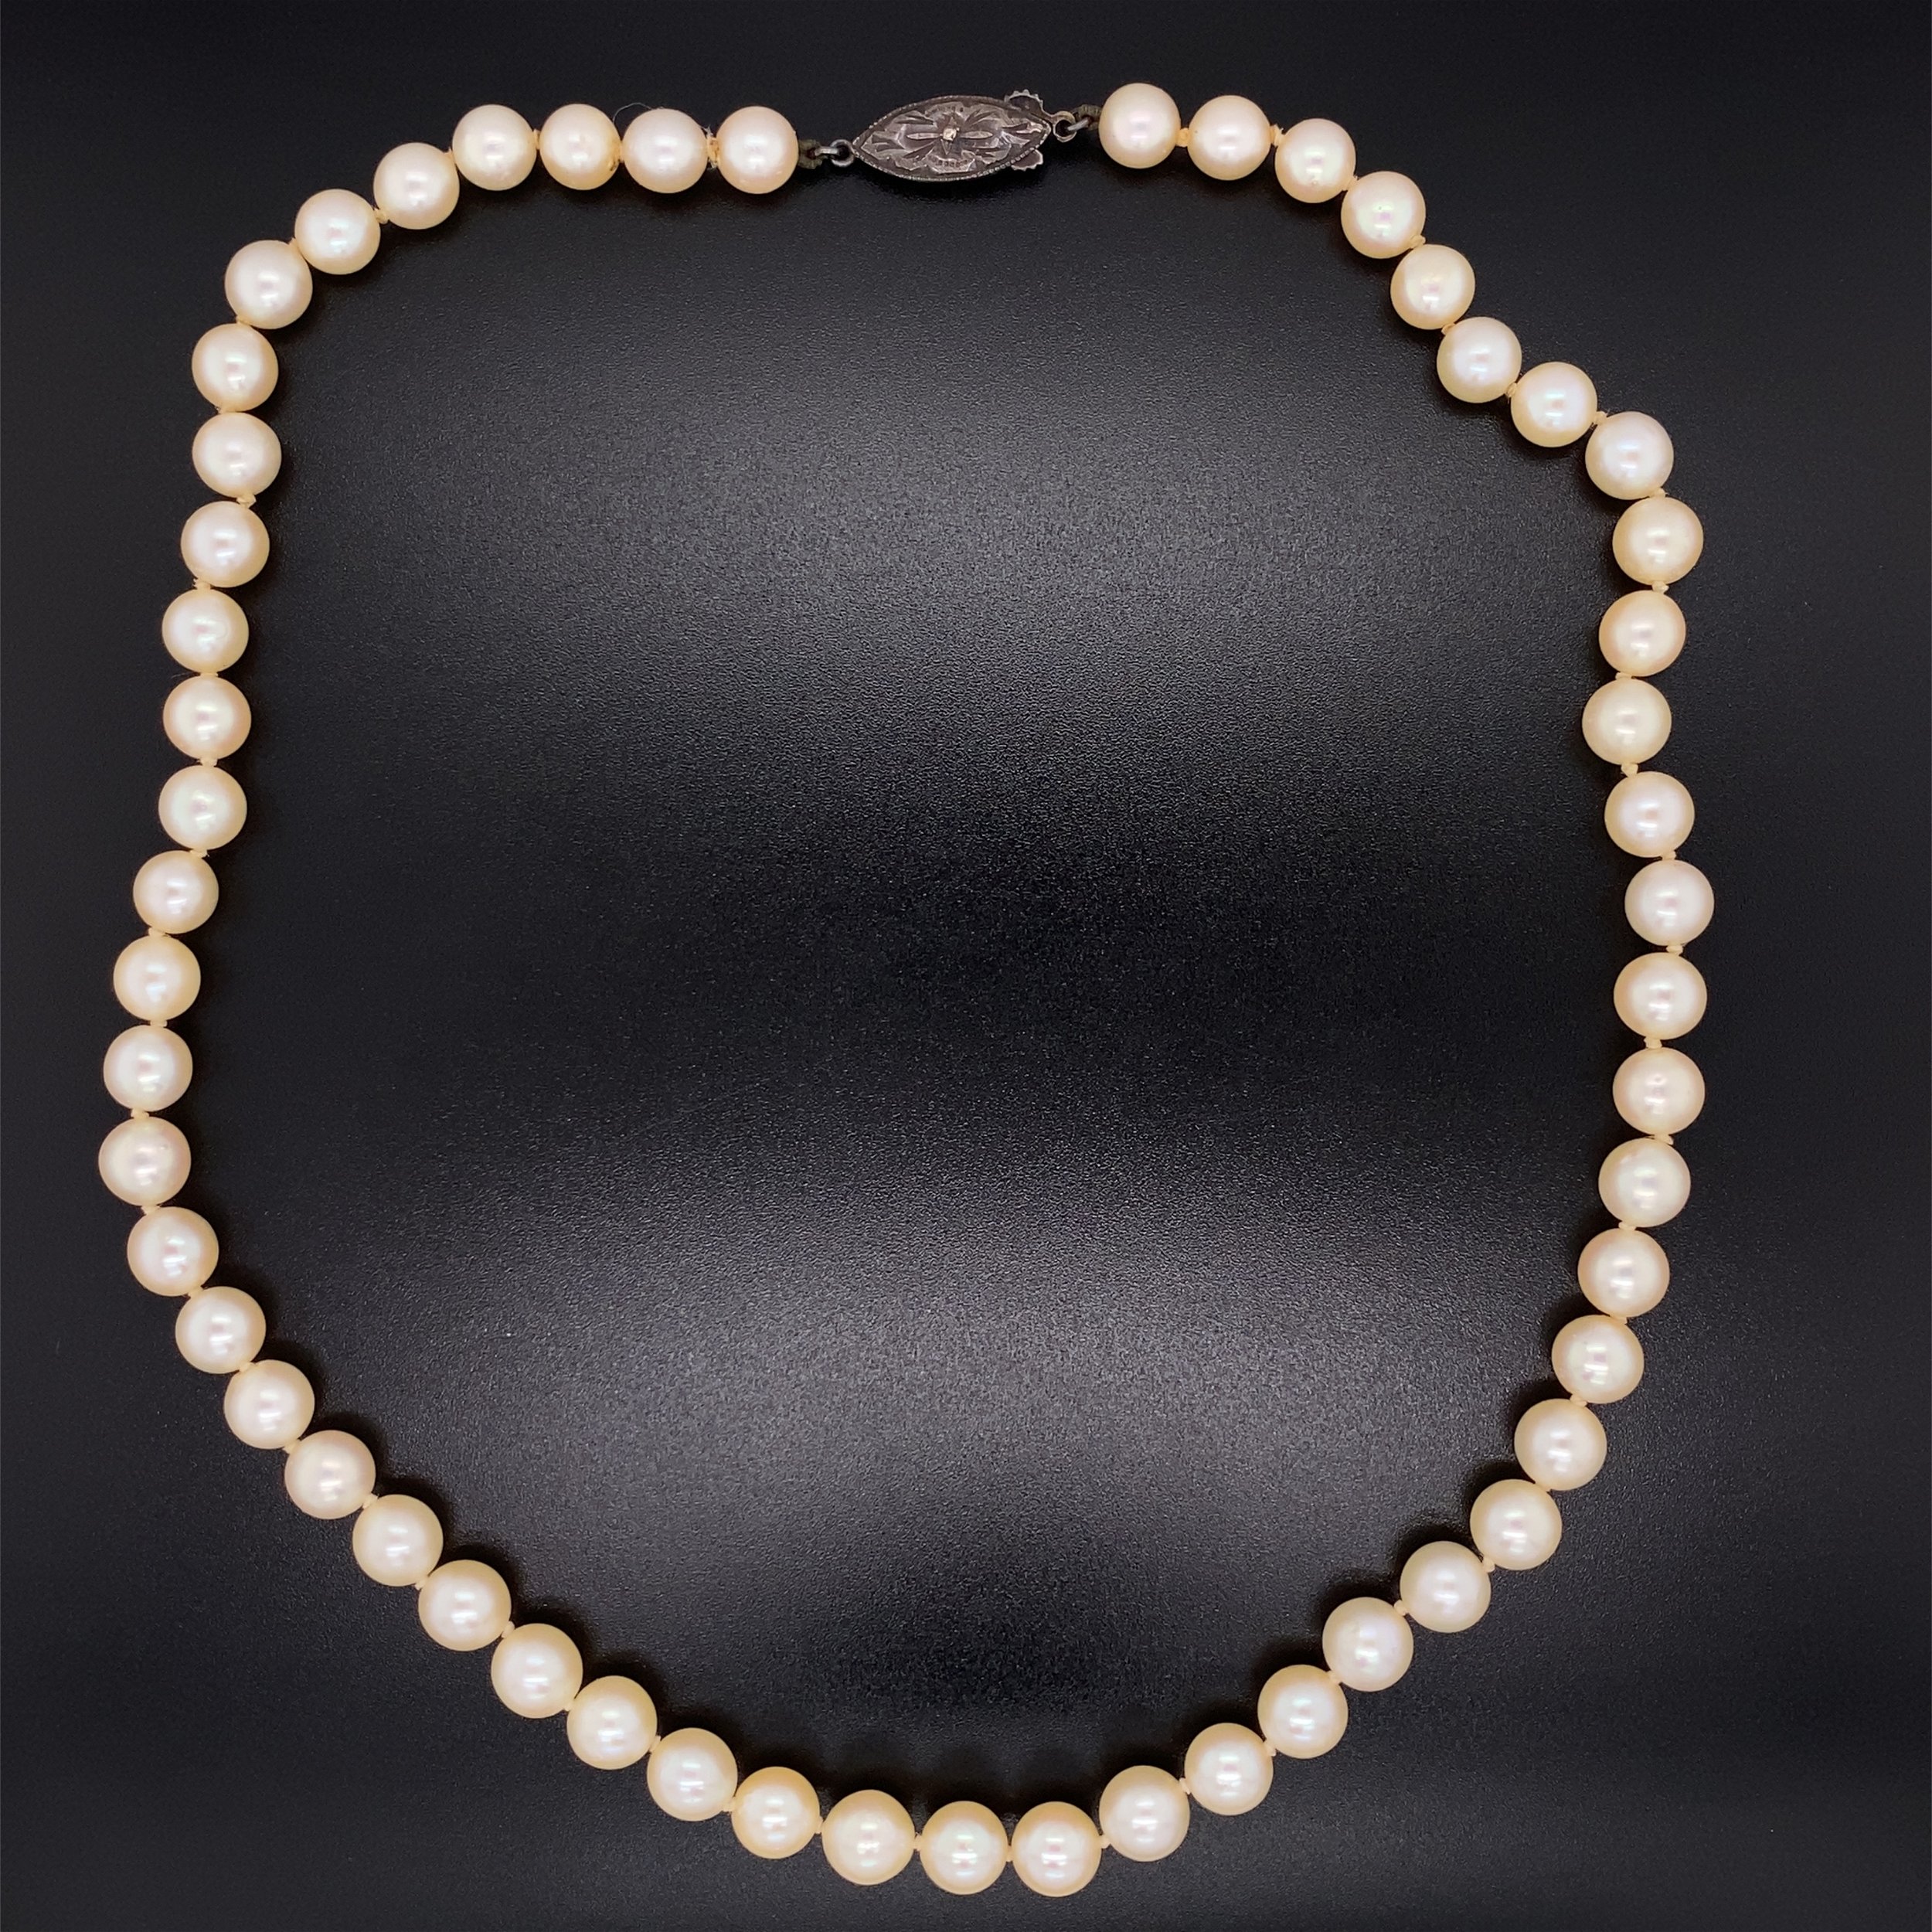 6.5mm Fresh Water Pearl Necklace 925 Sterling Clasp 22.5g, 16"